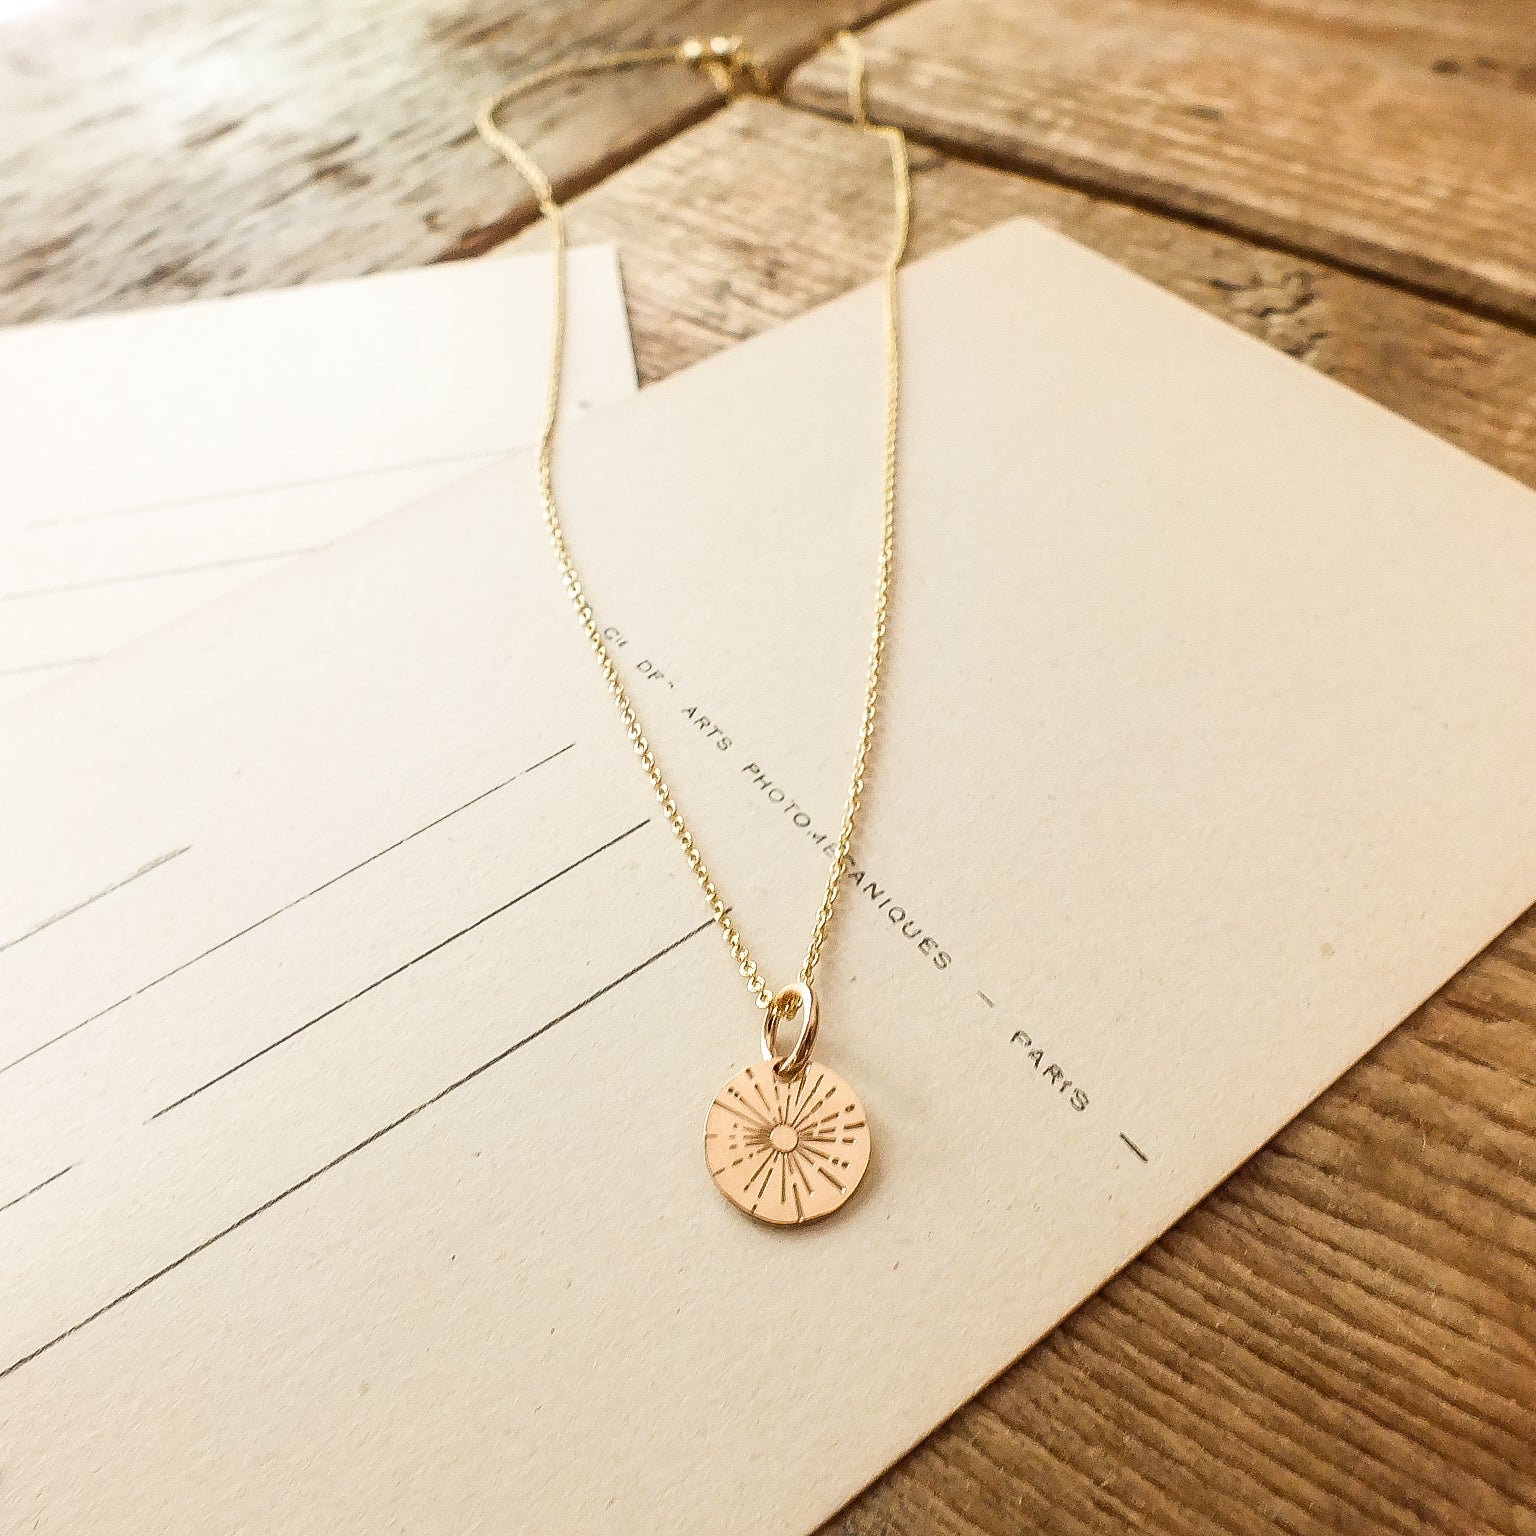 Be The Light Necklace with a Sunshine Charm pendant displayed on paper with lines by Becoming Jewelry.